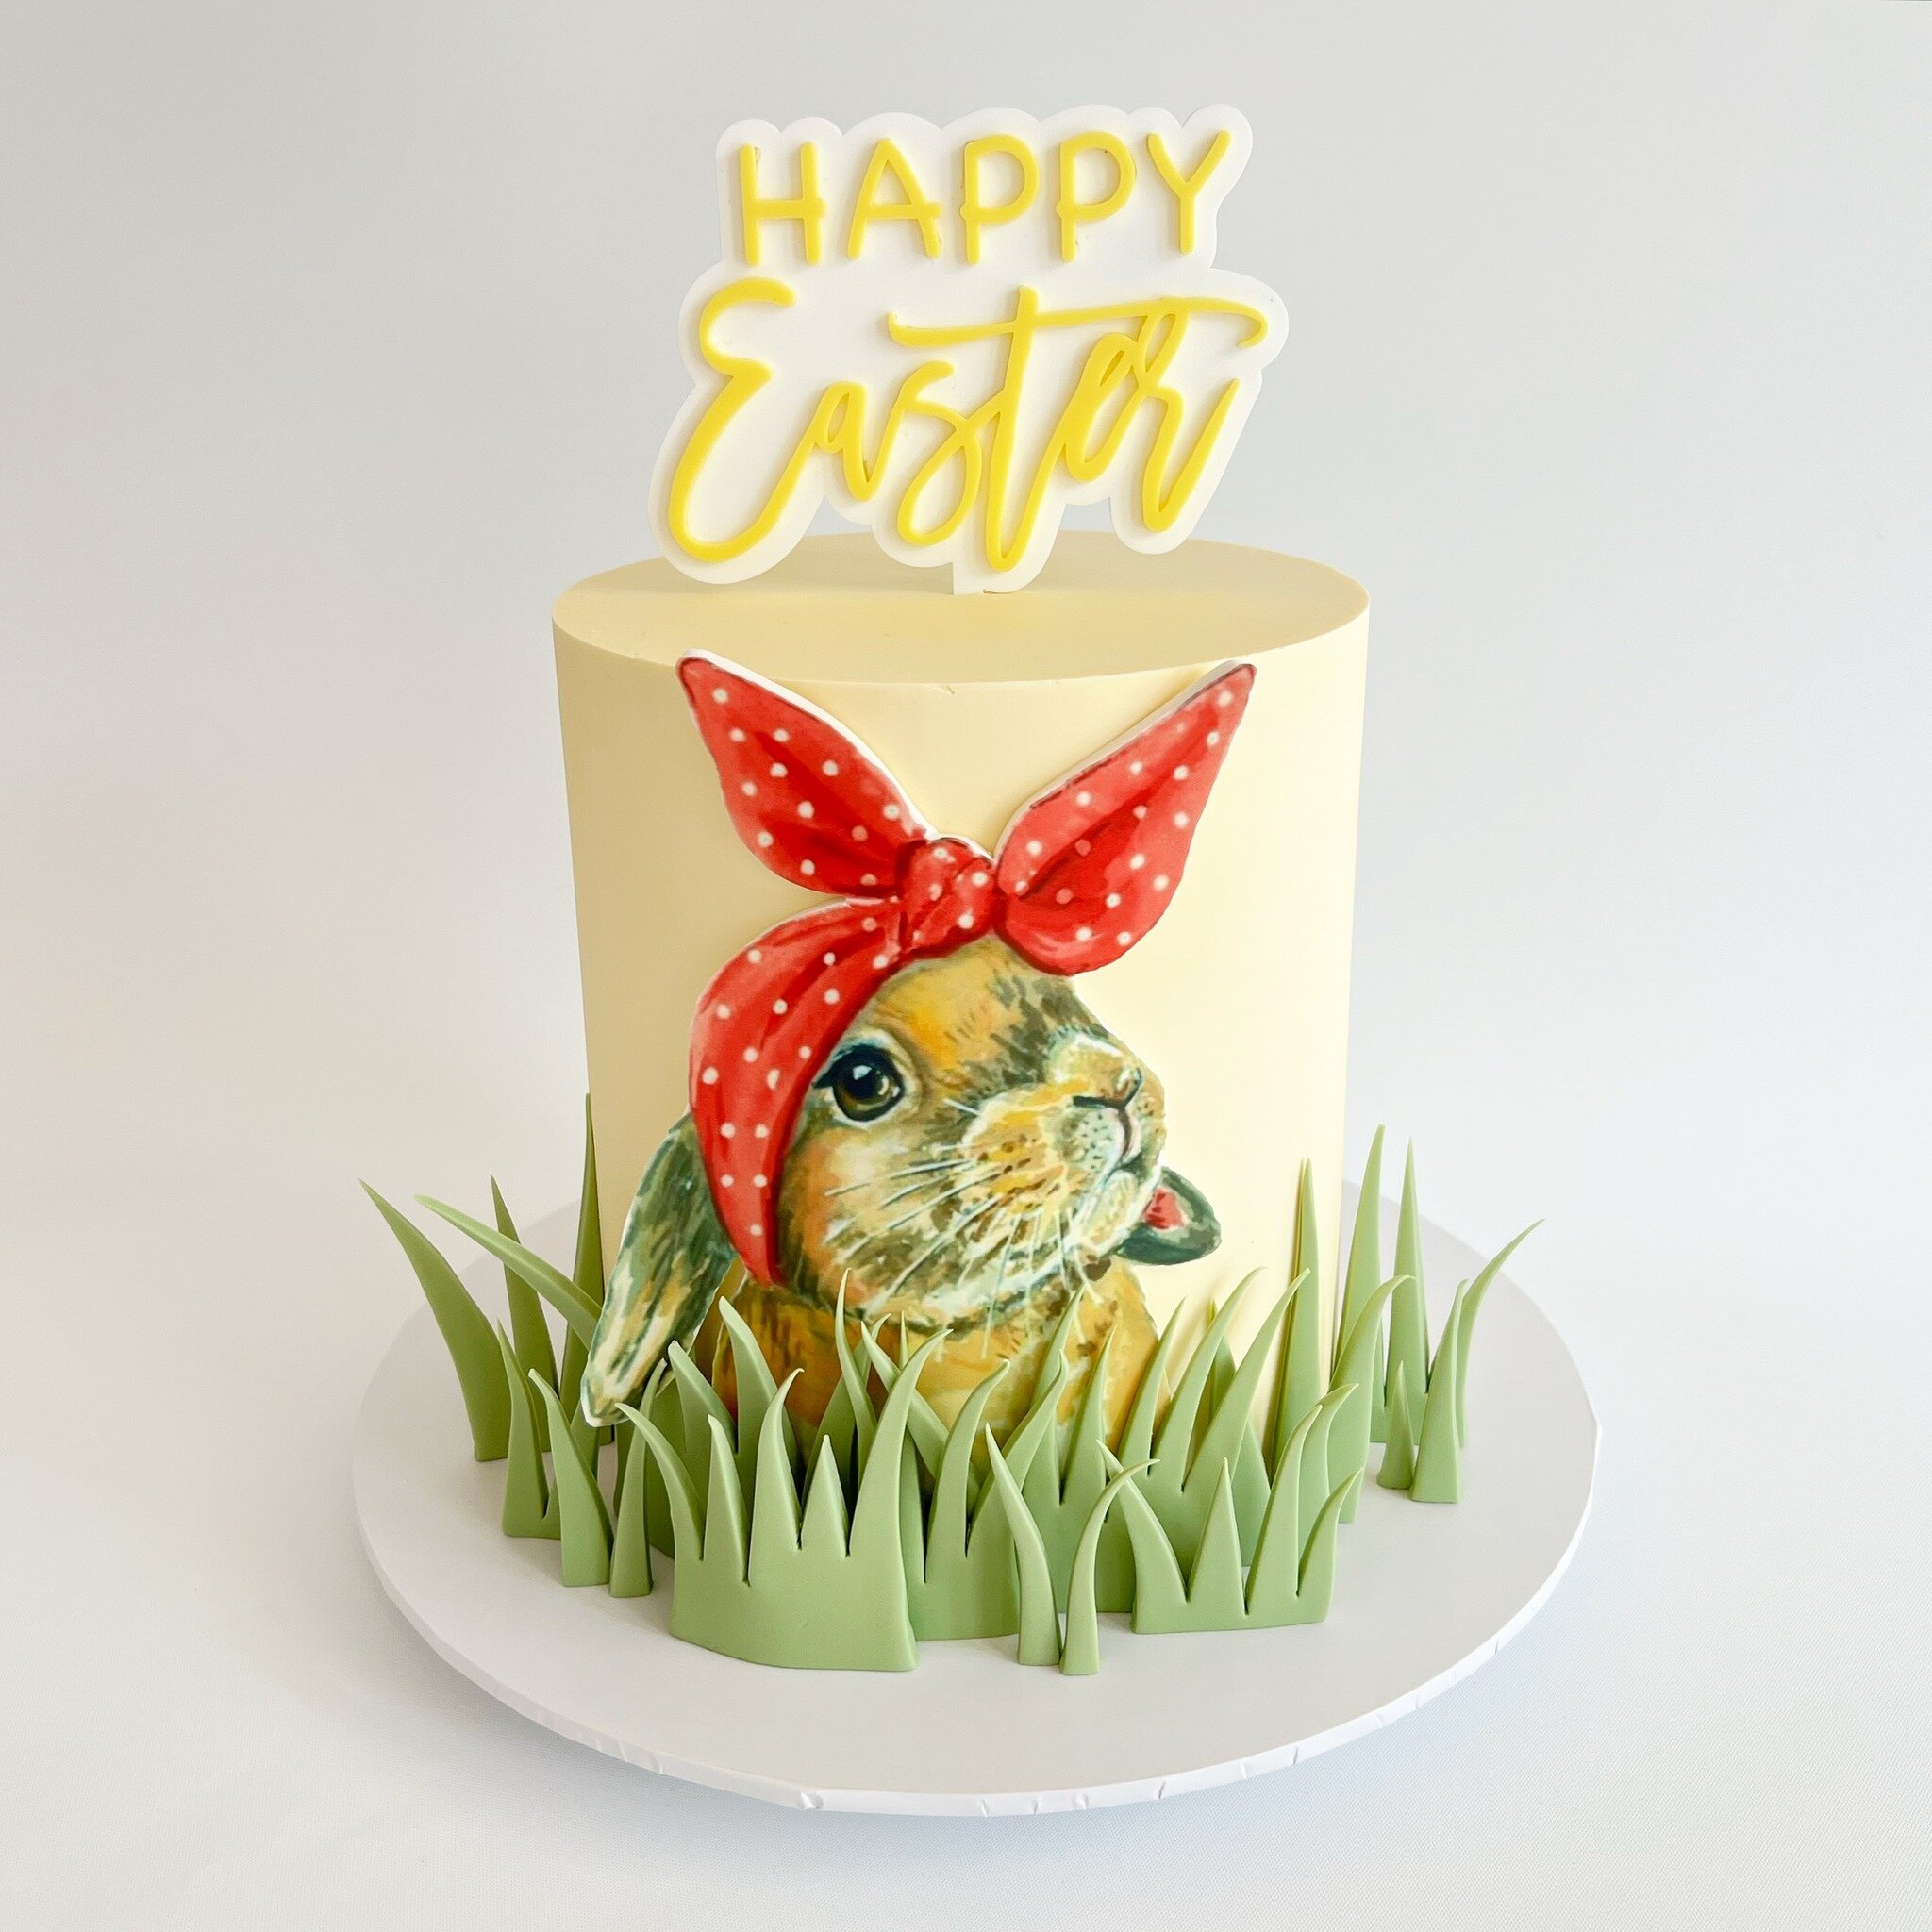 Wishing everyone celebrating today and very happy &amp; safe Easter!! 
(Unsure who to credit for original design but boy was she cute!)
@kctimesco @customicing @goldcoastbespokestyling 
.
#frostedindulgence #brisbanecakes #eastercake #bunnycake #cute